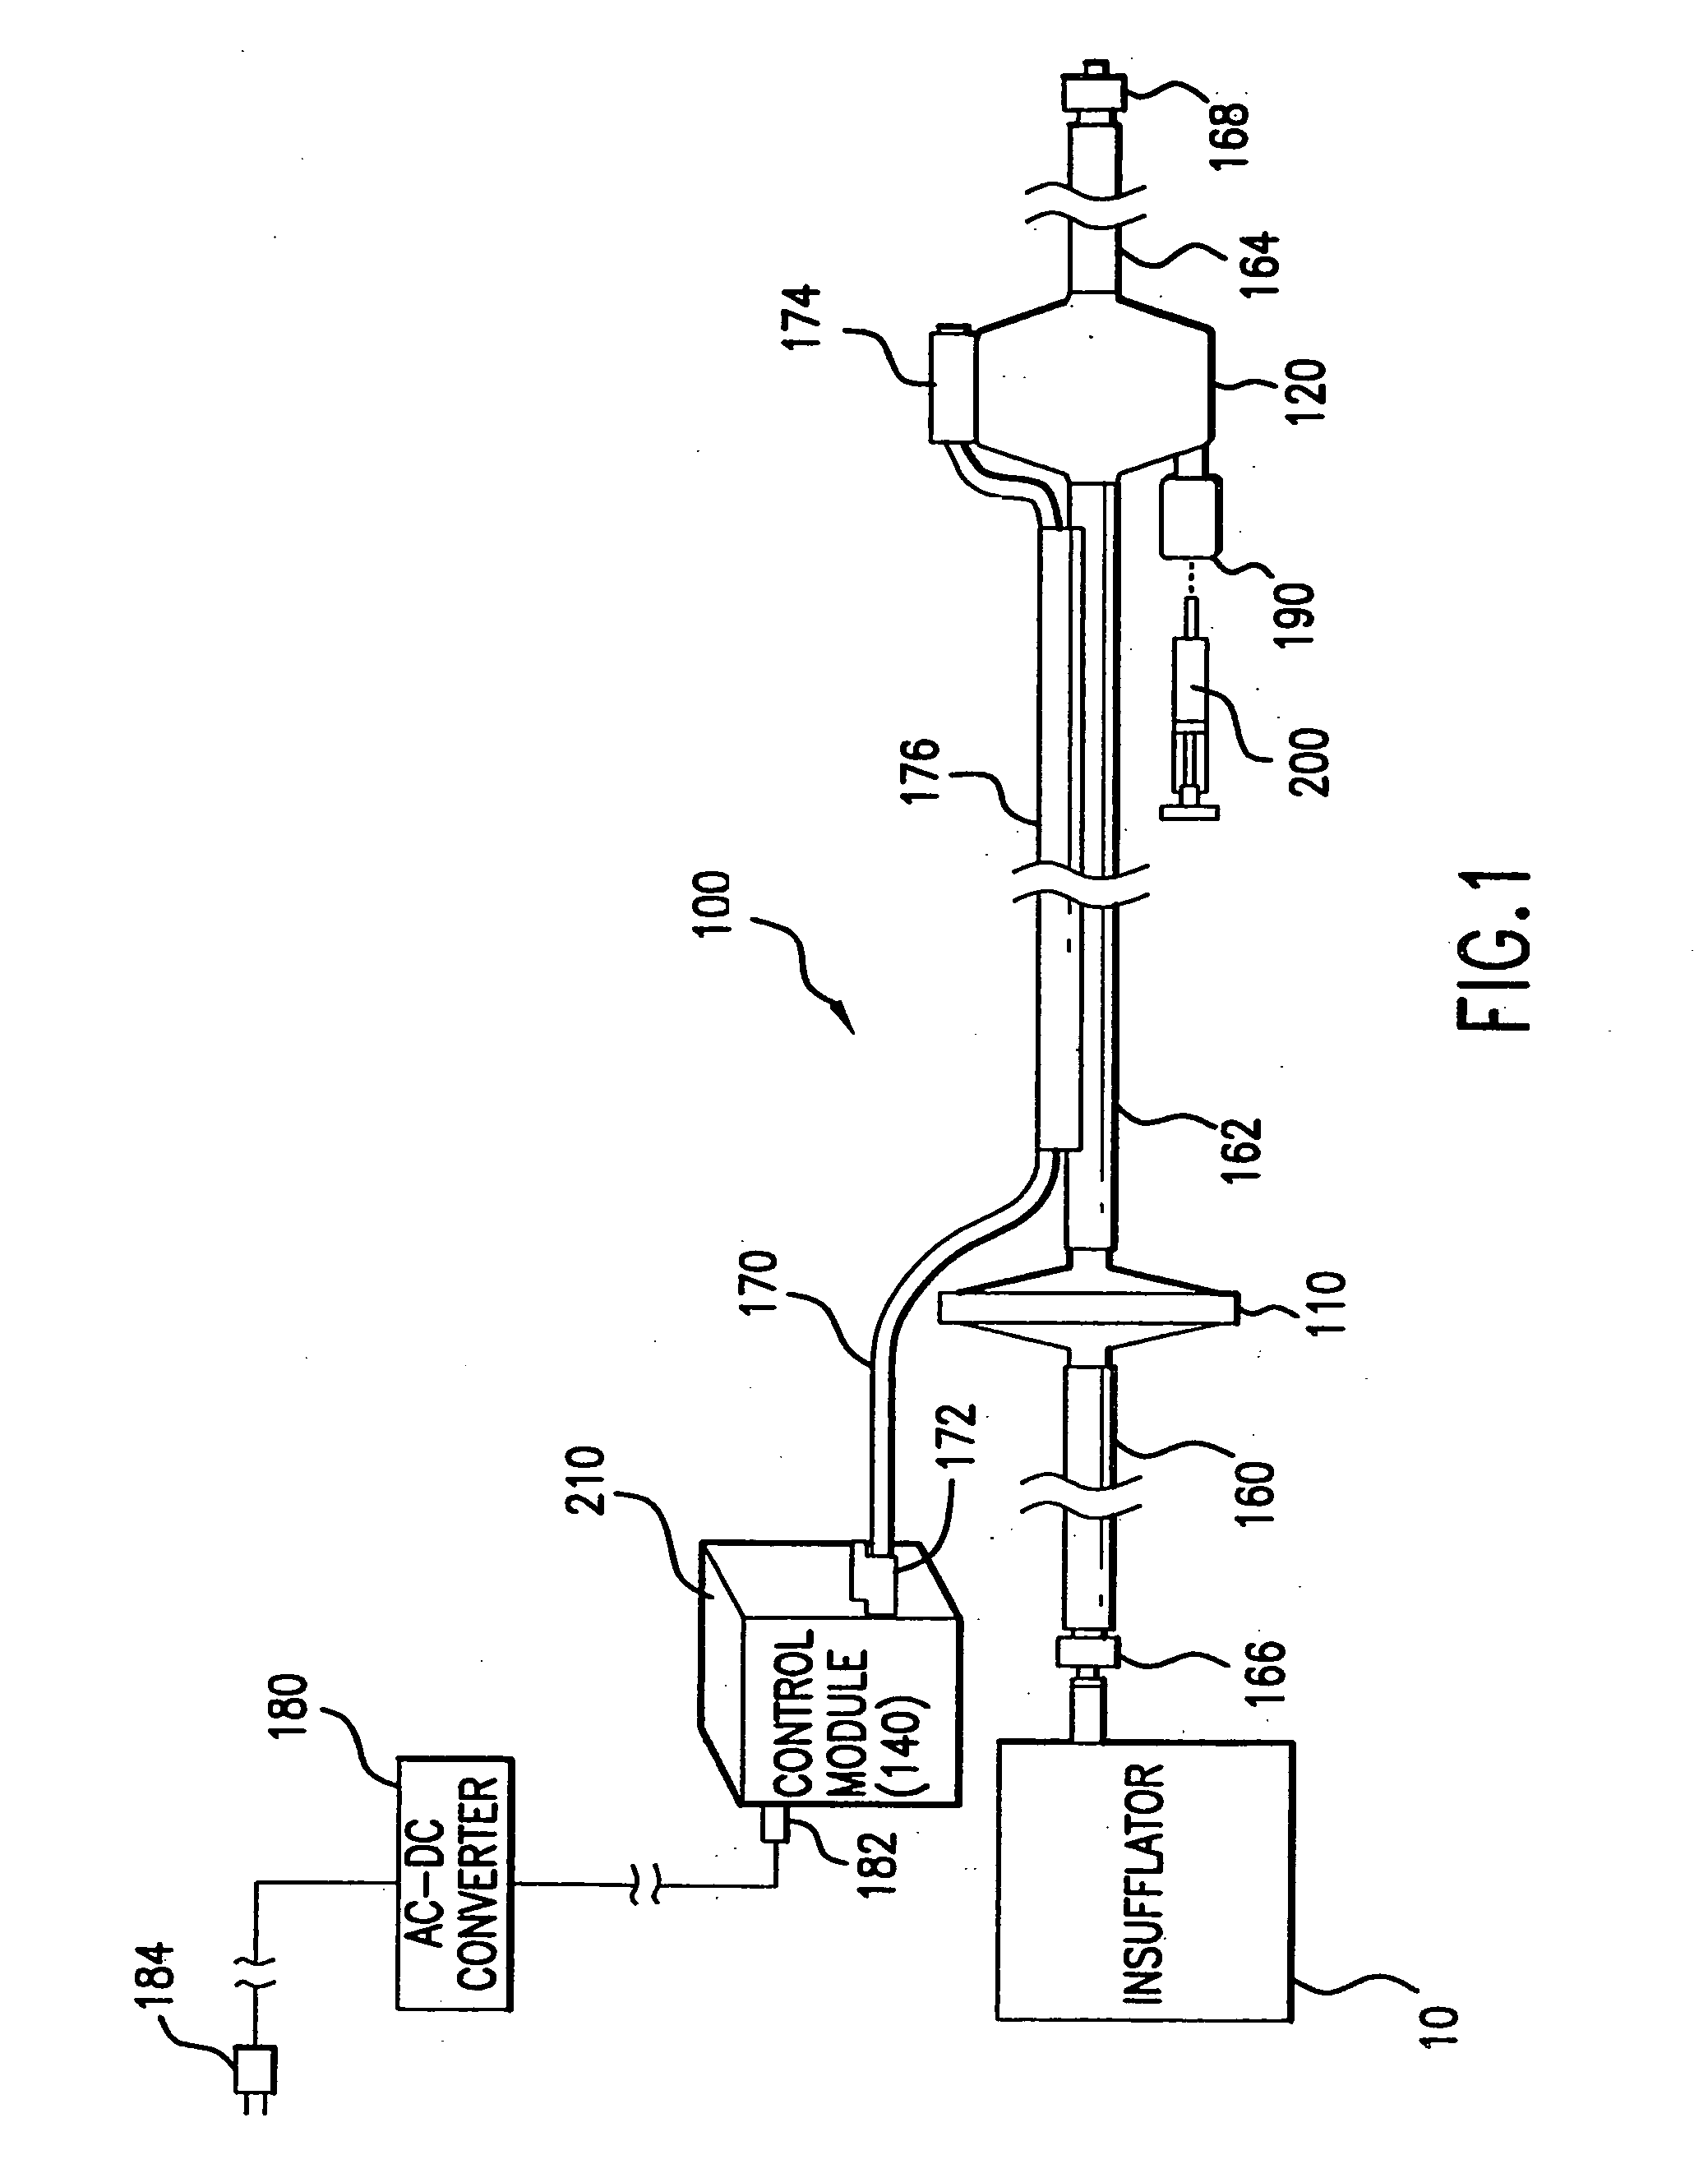 Method and apparatus for treating gas for use in endoscopic surgery